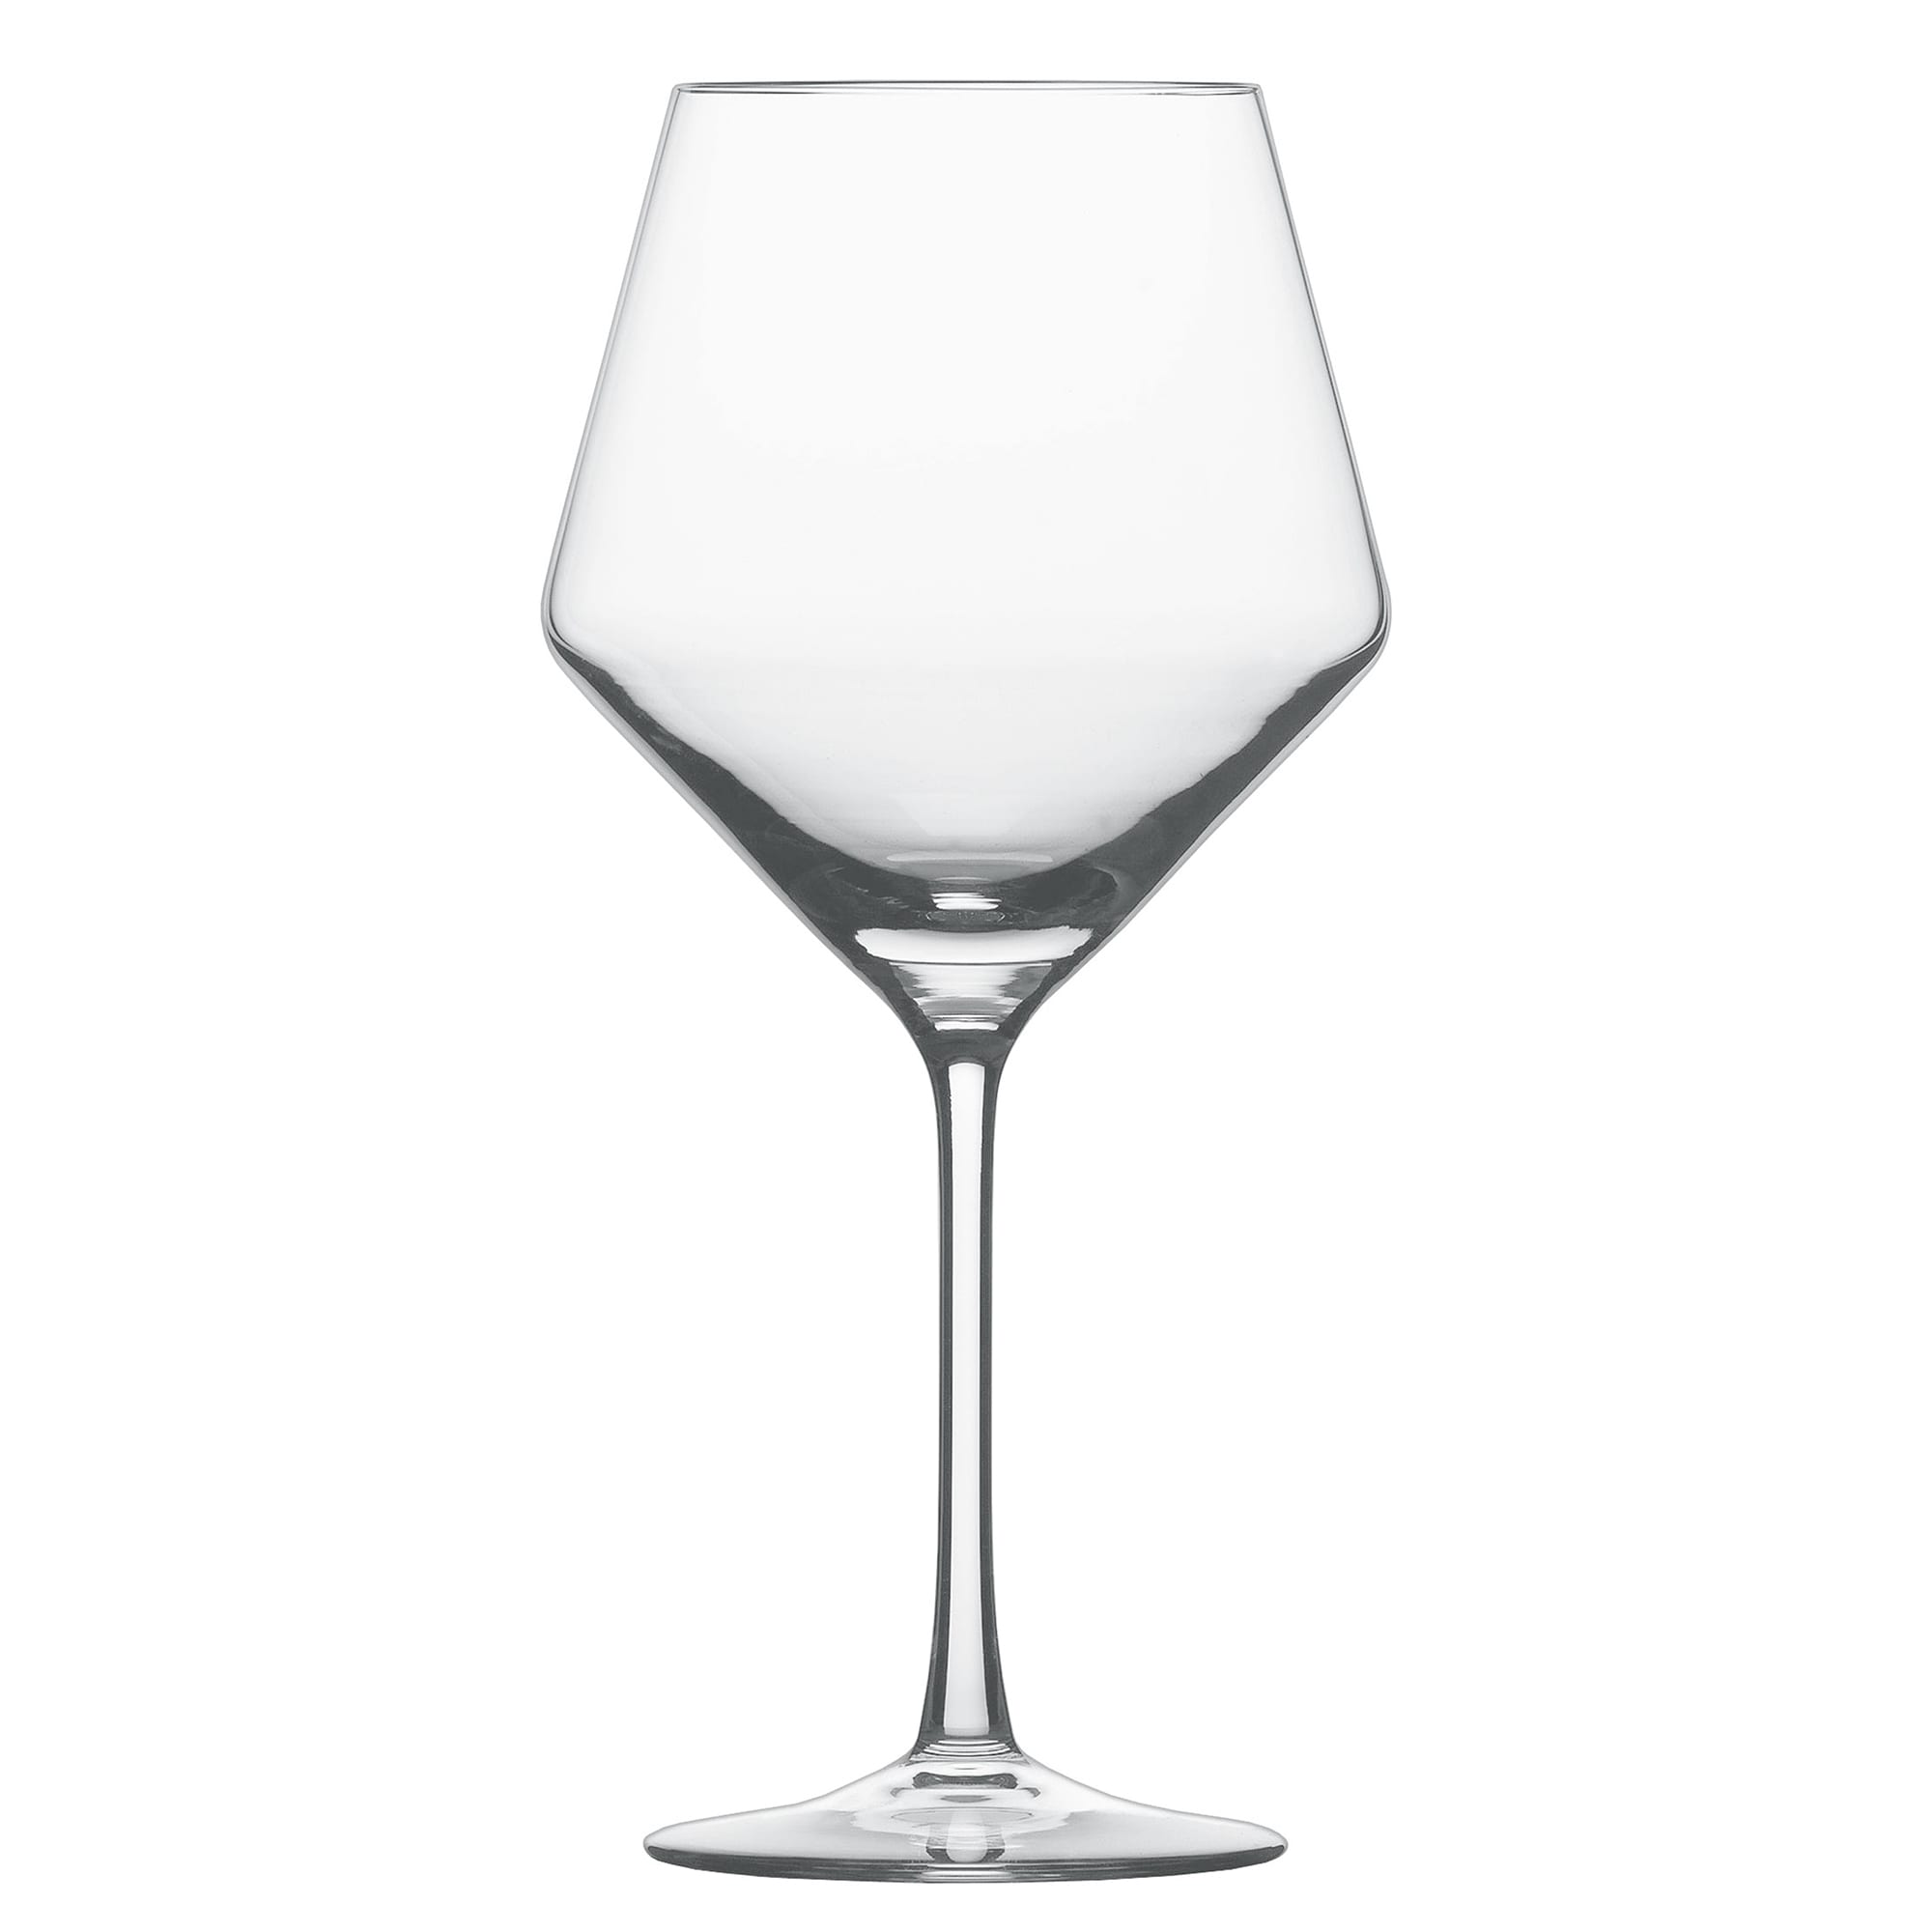 Schott Zwiesel Pure Tour Martini Coupe Glass 11-Oz. + Reviews